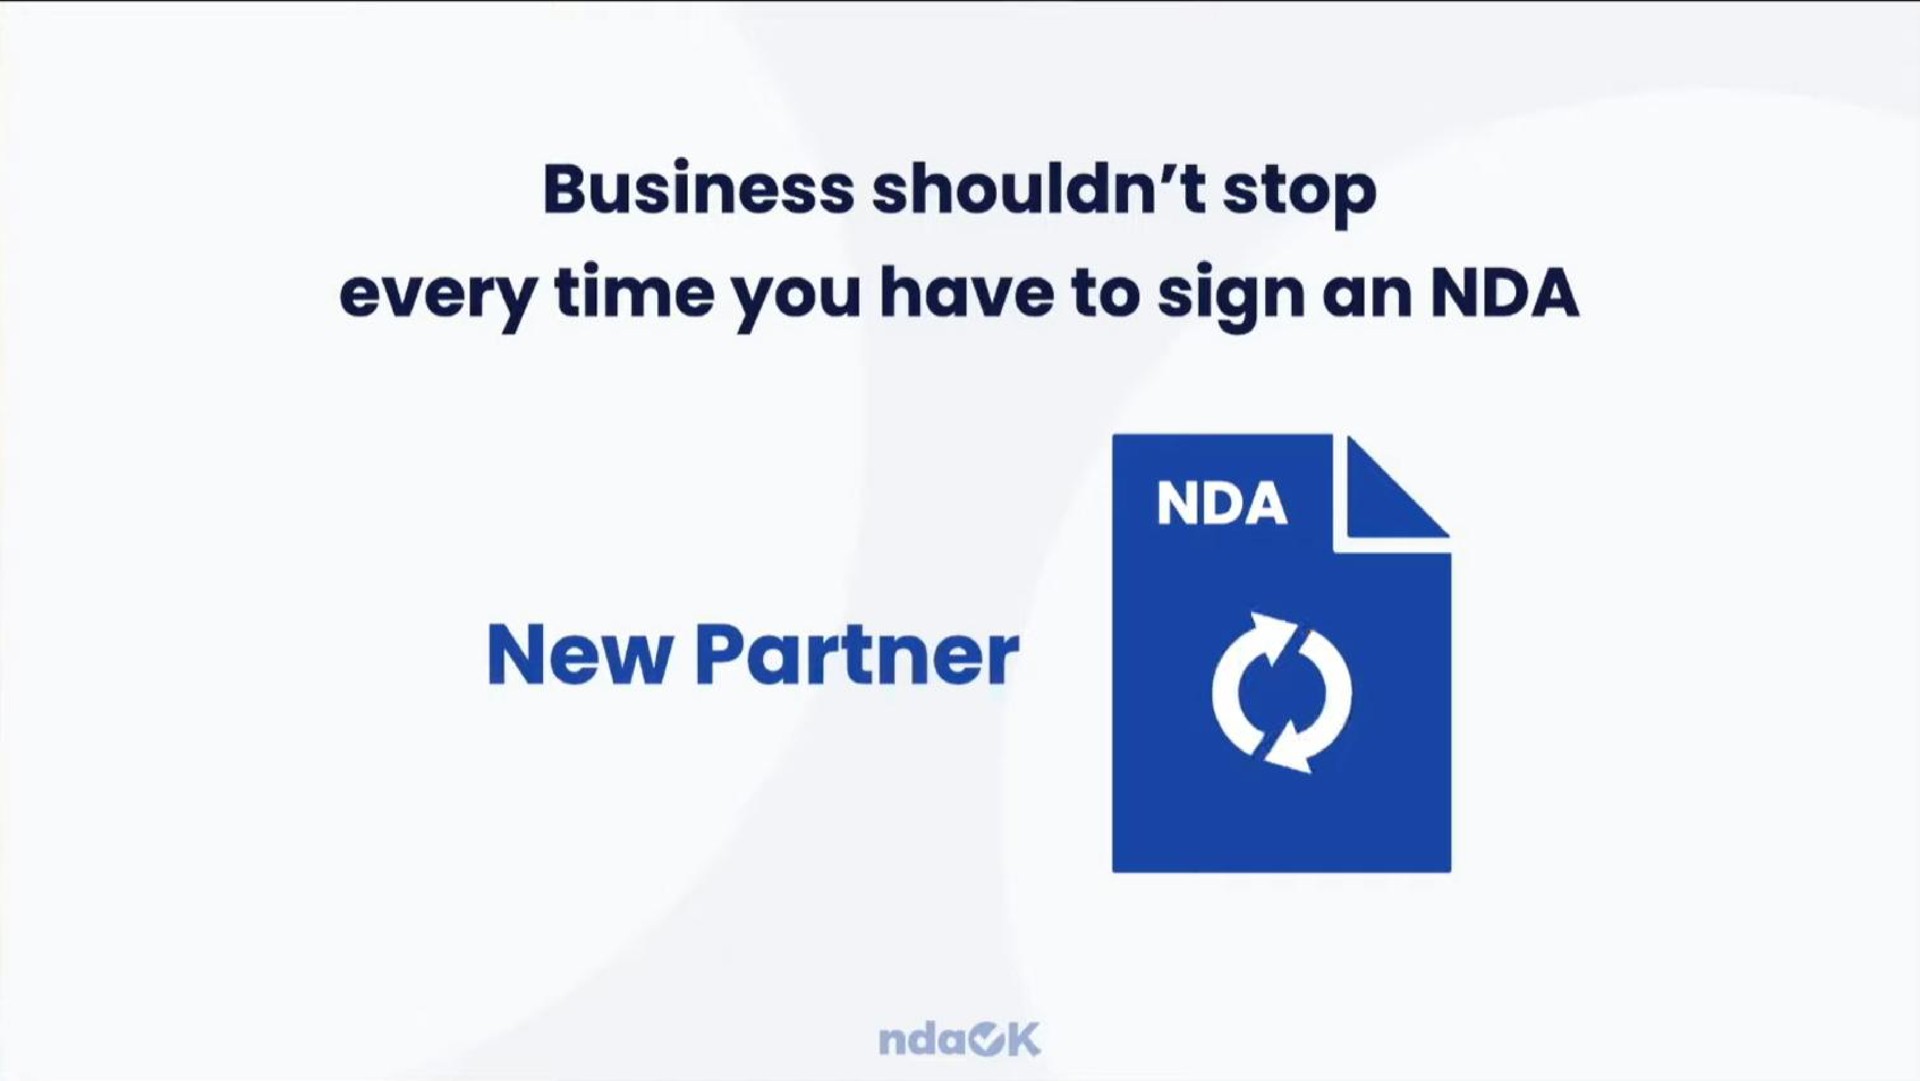 business stop every time you have to sign an new partner | ndaOK